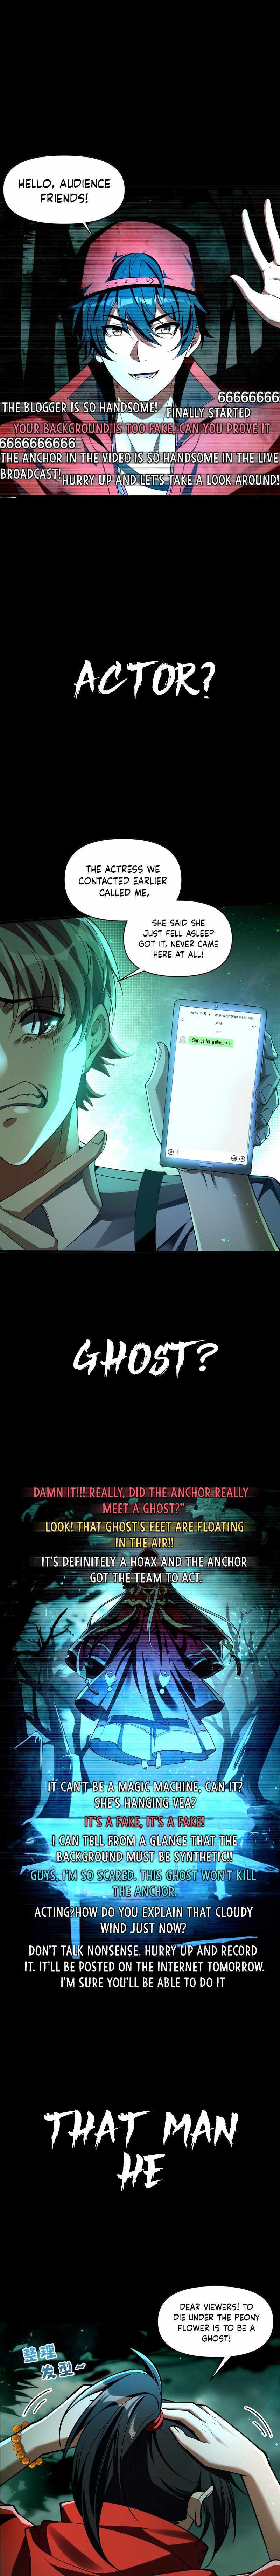 During The Live Streaming, I Proposed To A Female Ghost And She Actually Agreed?! - Page 3